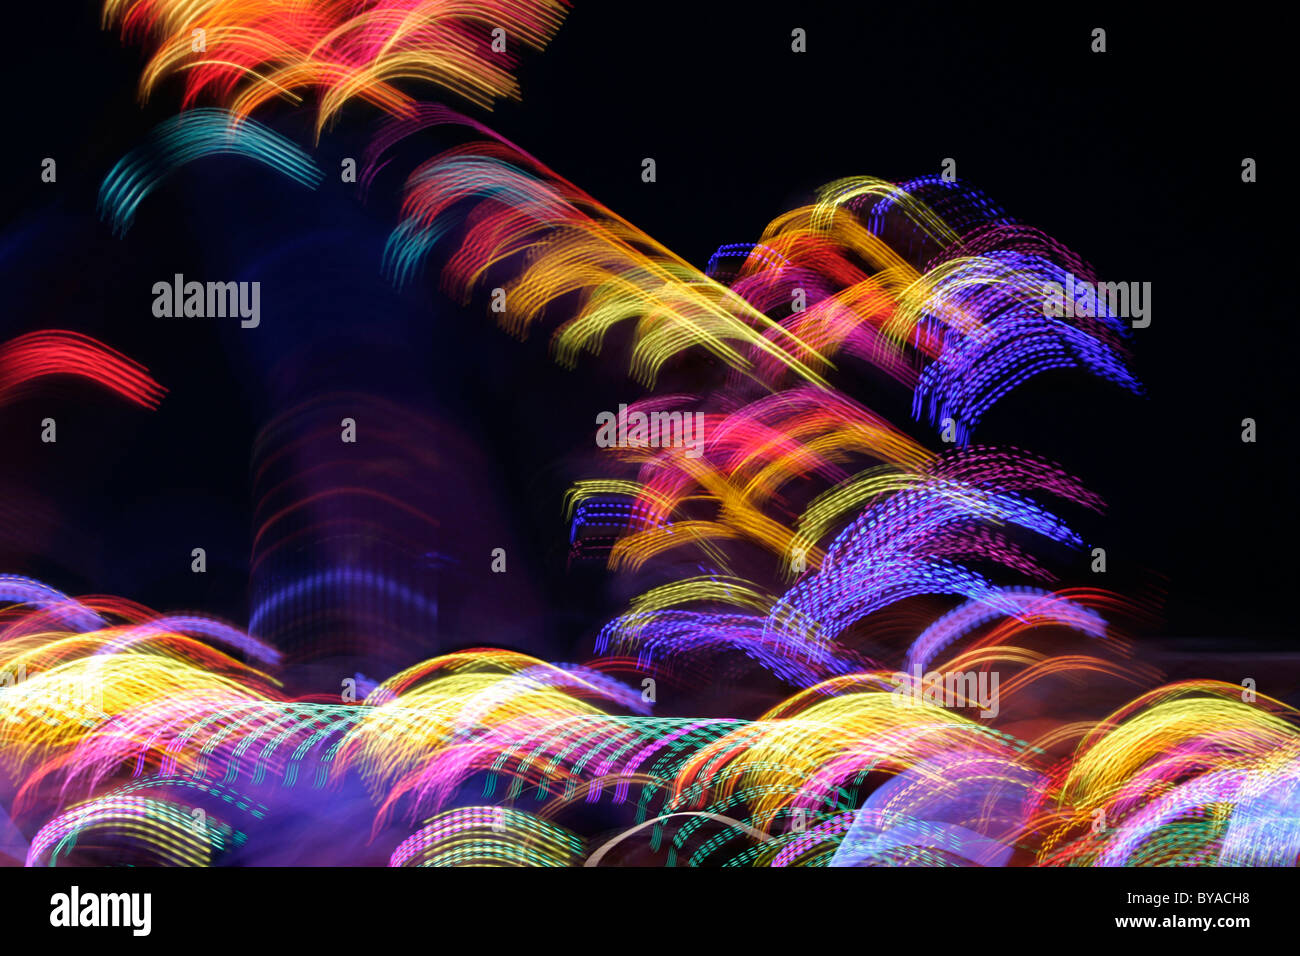 Abstract light painting Stock Photo